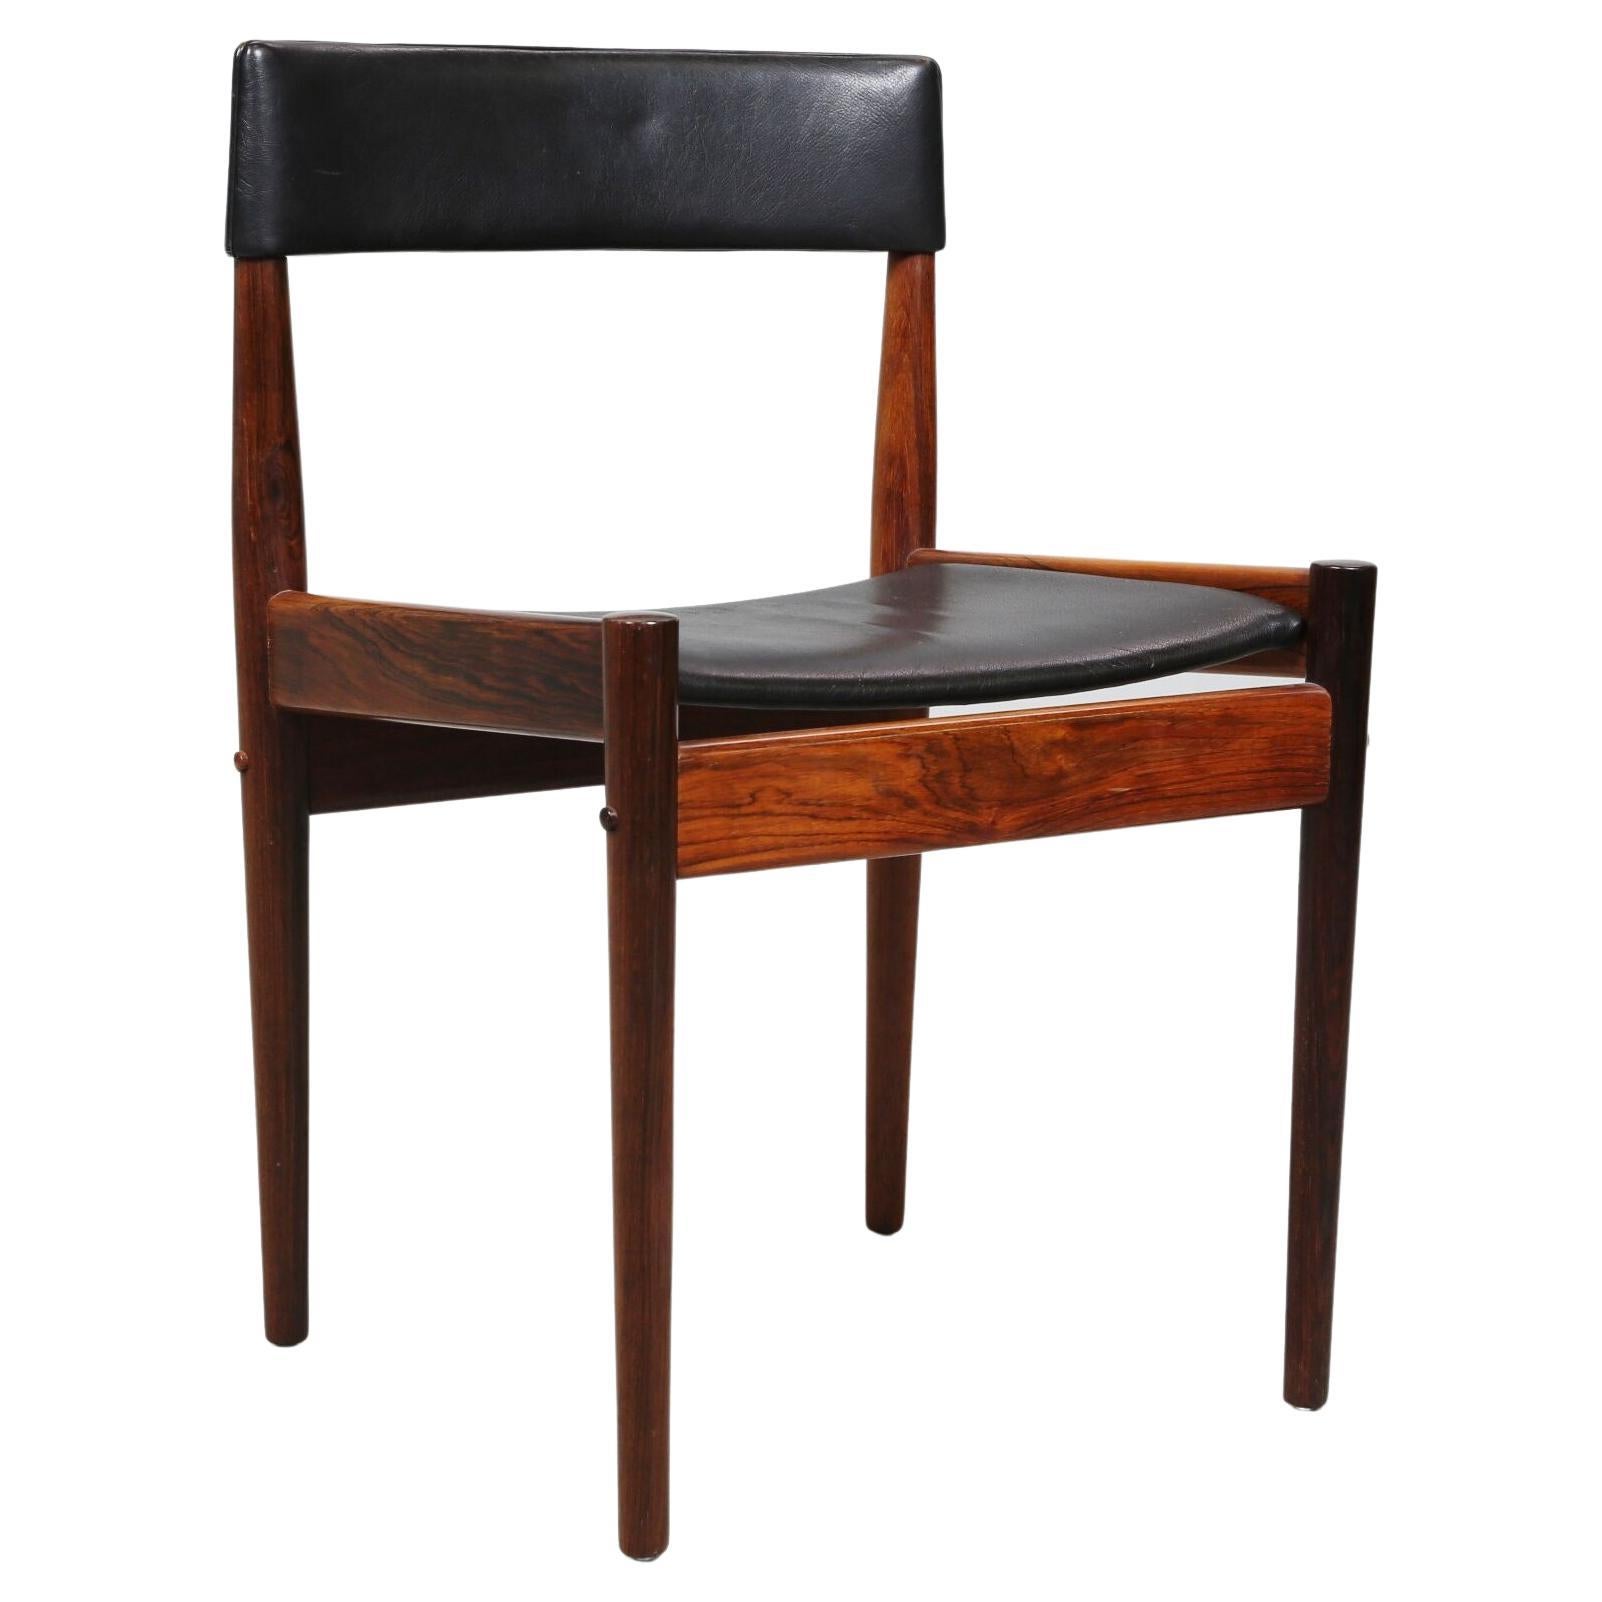 Grete Jalk, Midcentury 4 Rosewood and Leather Chairs P Jeppesens Denmark 